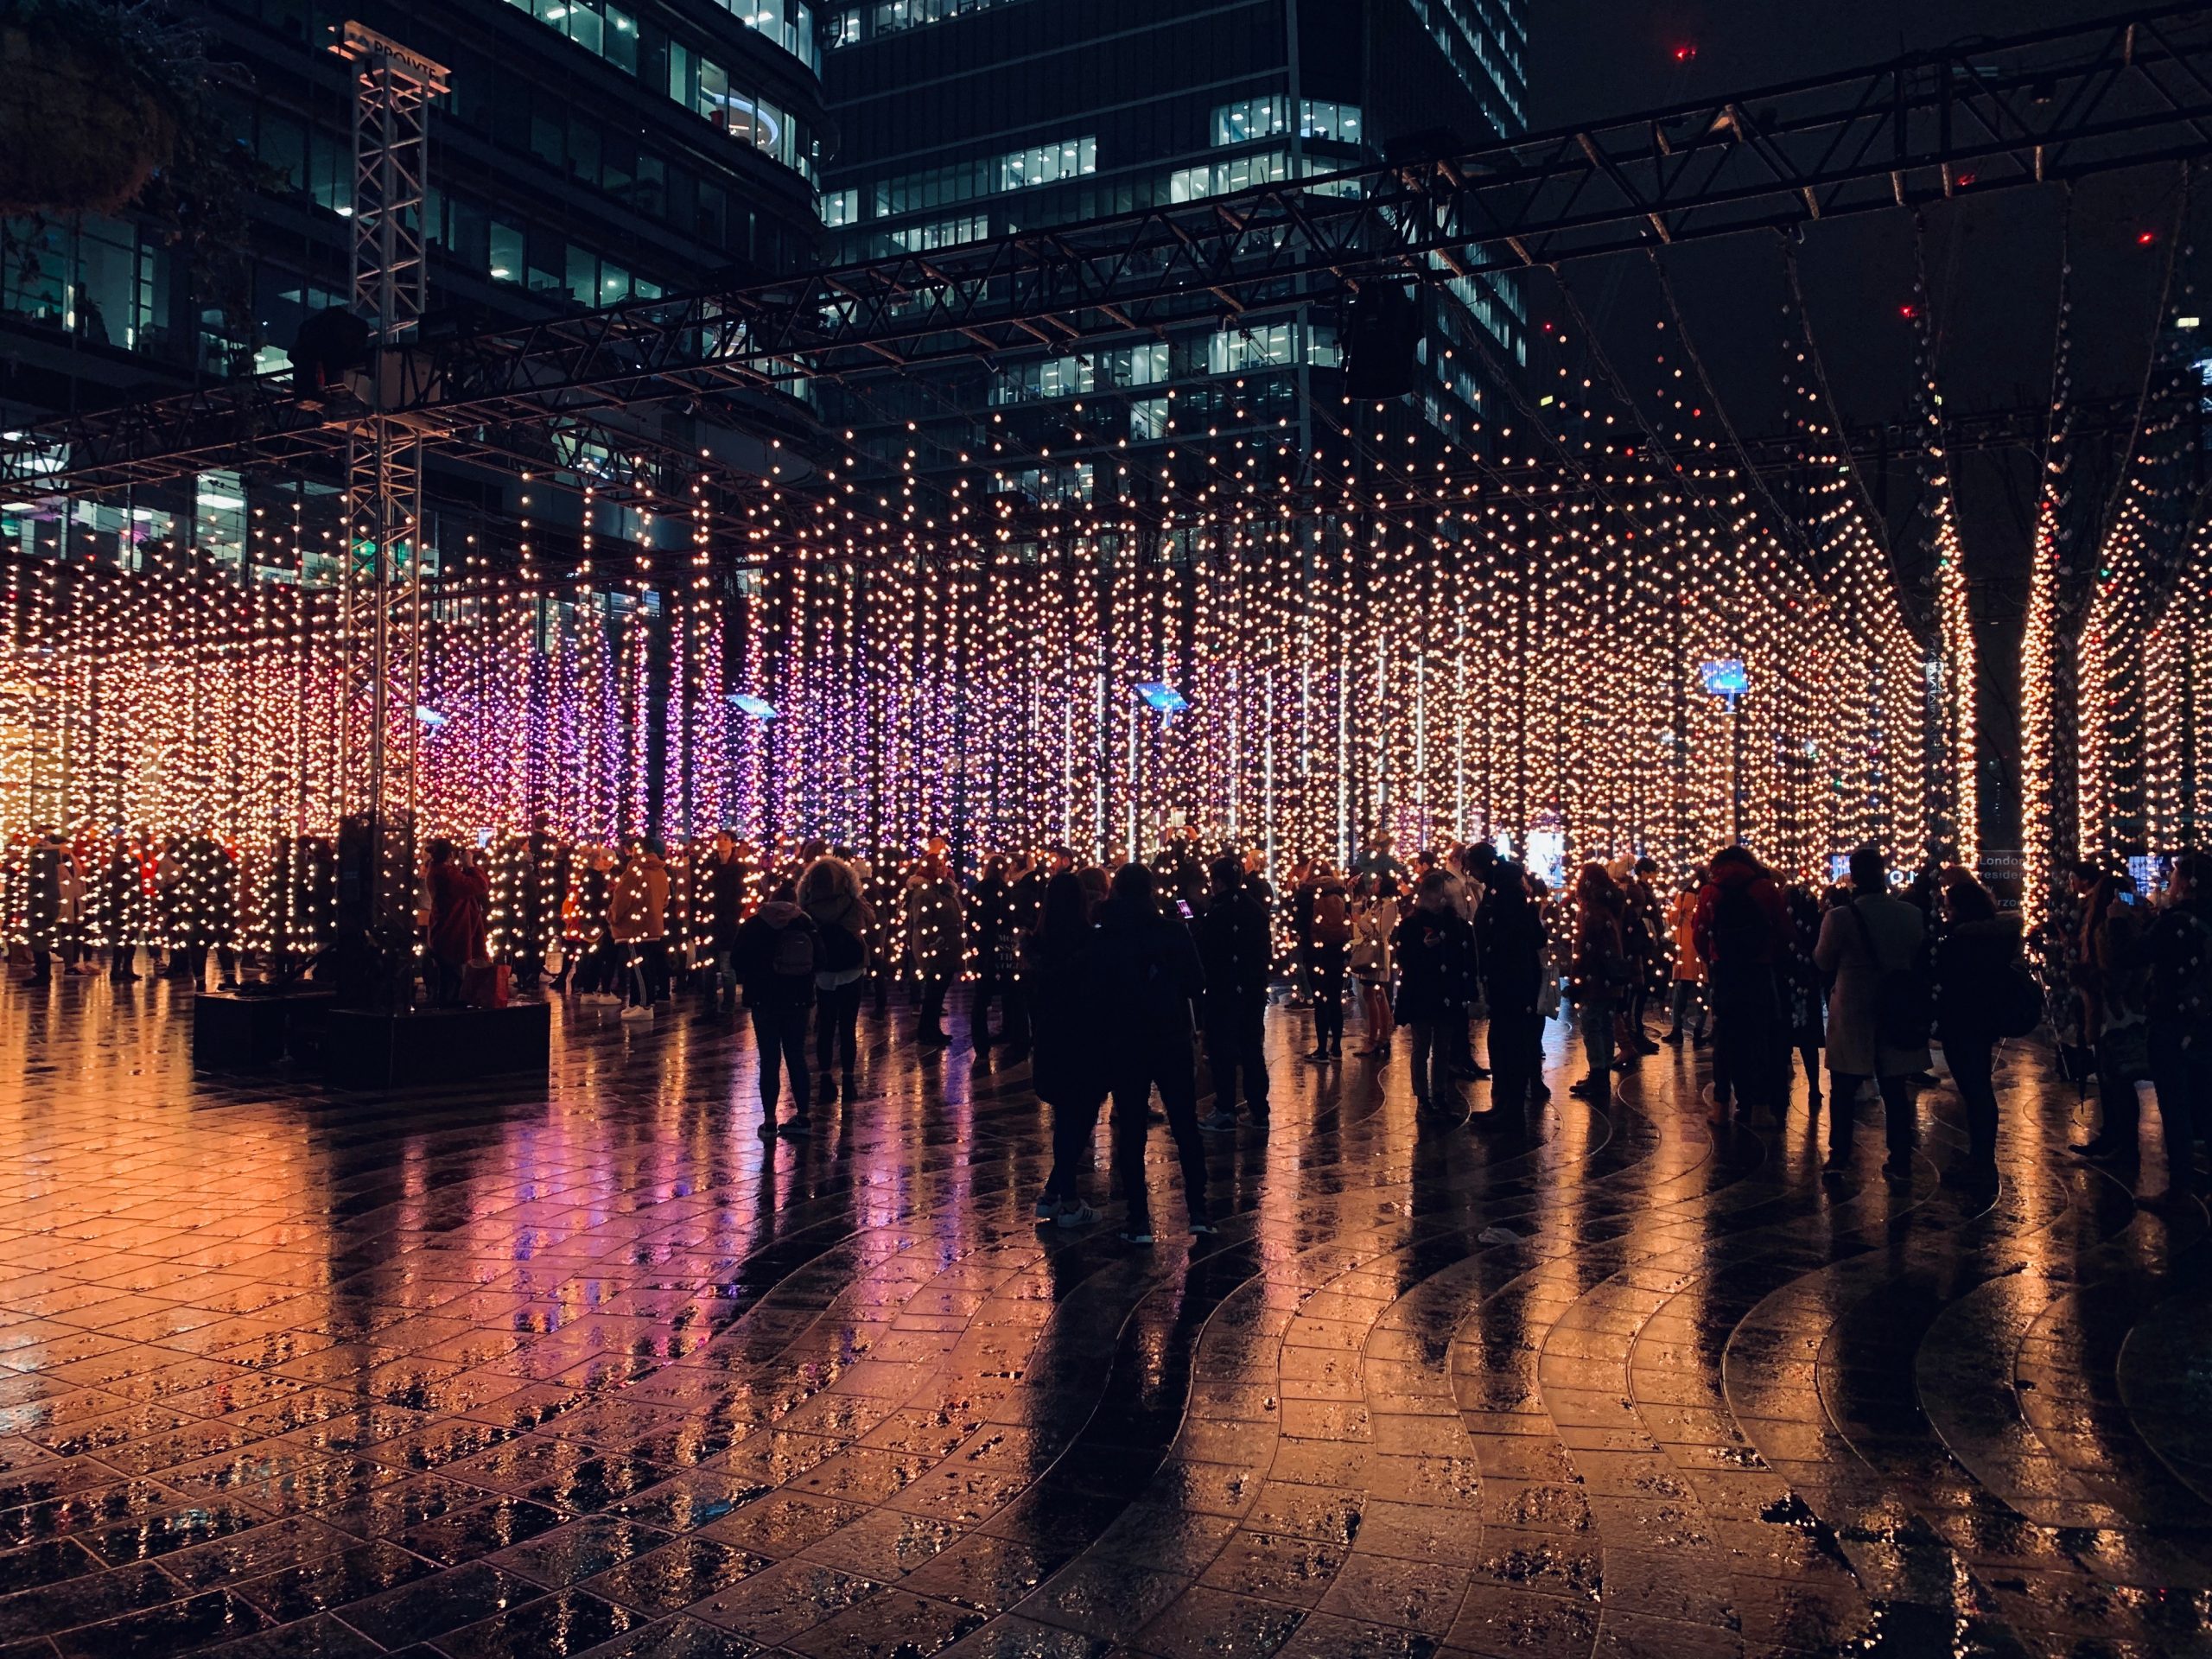 Groups of people congregating on an illuminated plaza